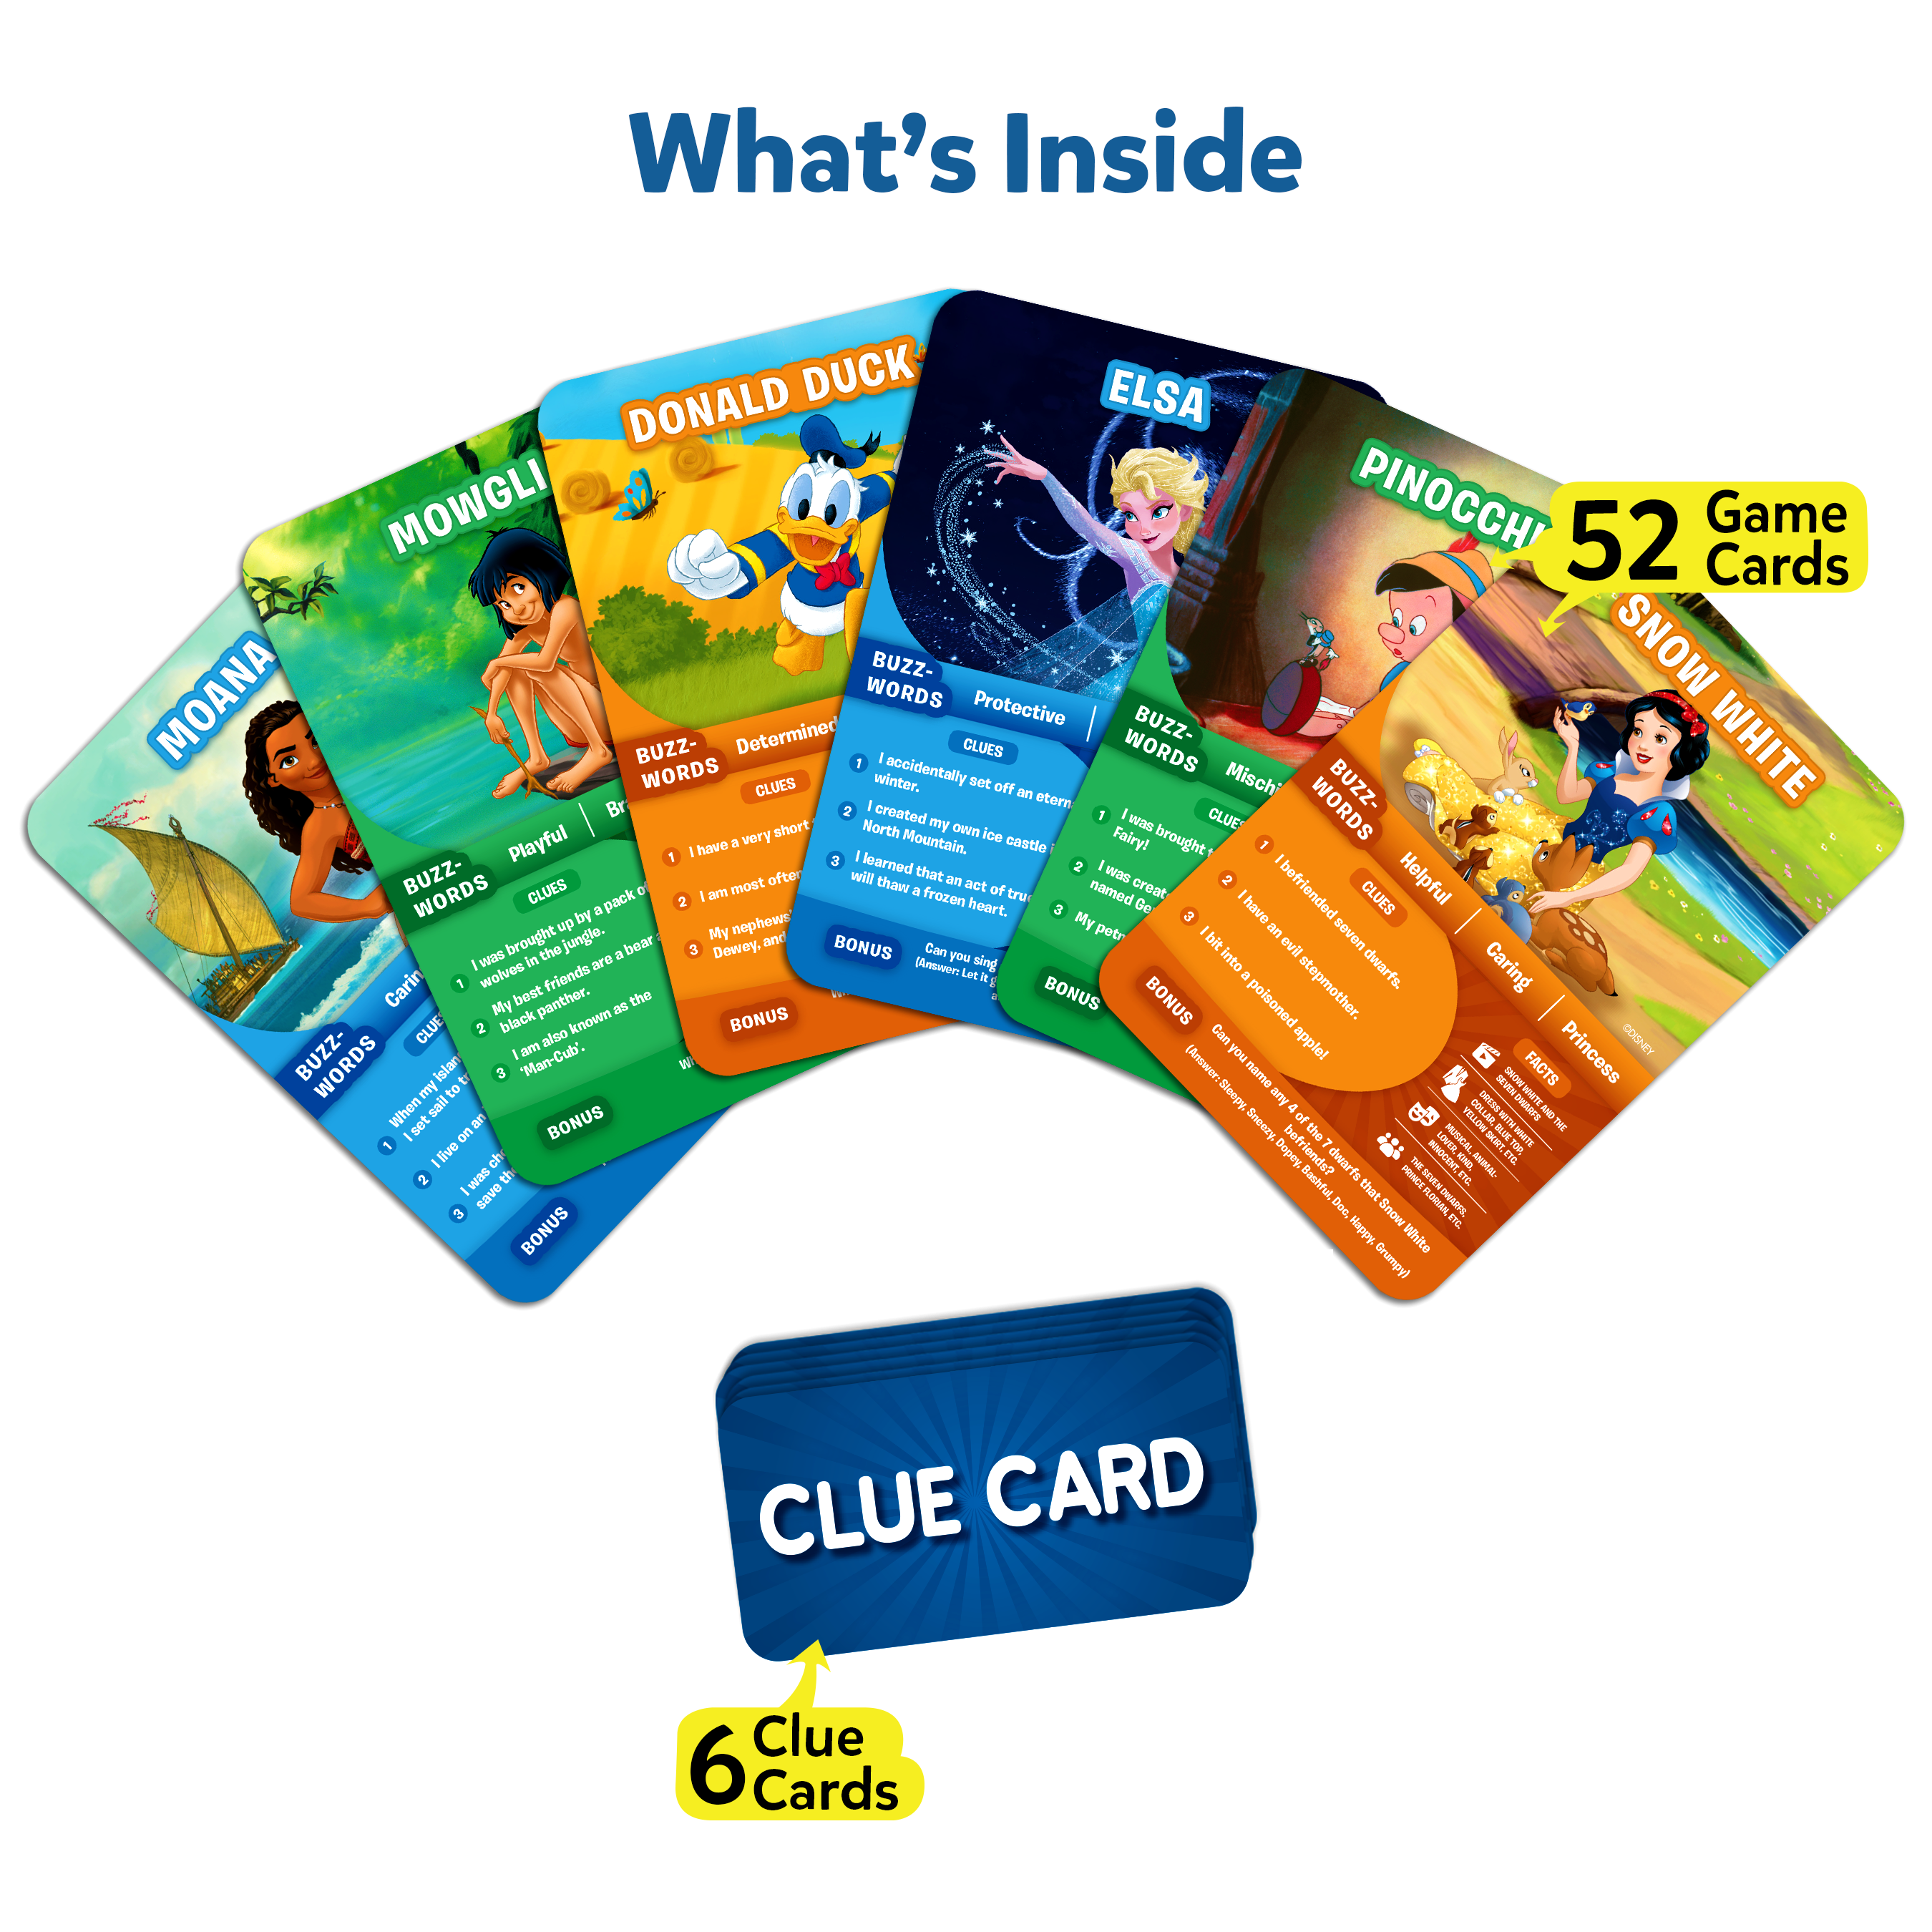 Skillmatics Disney Card Game - Guess in 10, Gifts for Ages 6 and Up, Super Fun Mickey Mouse, Lion King Game for Kids